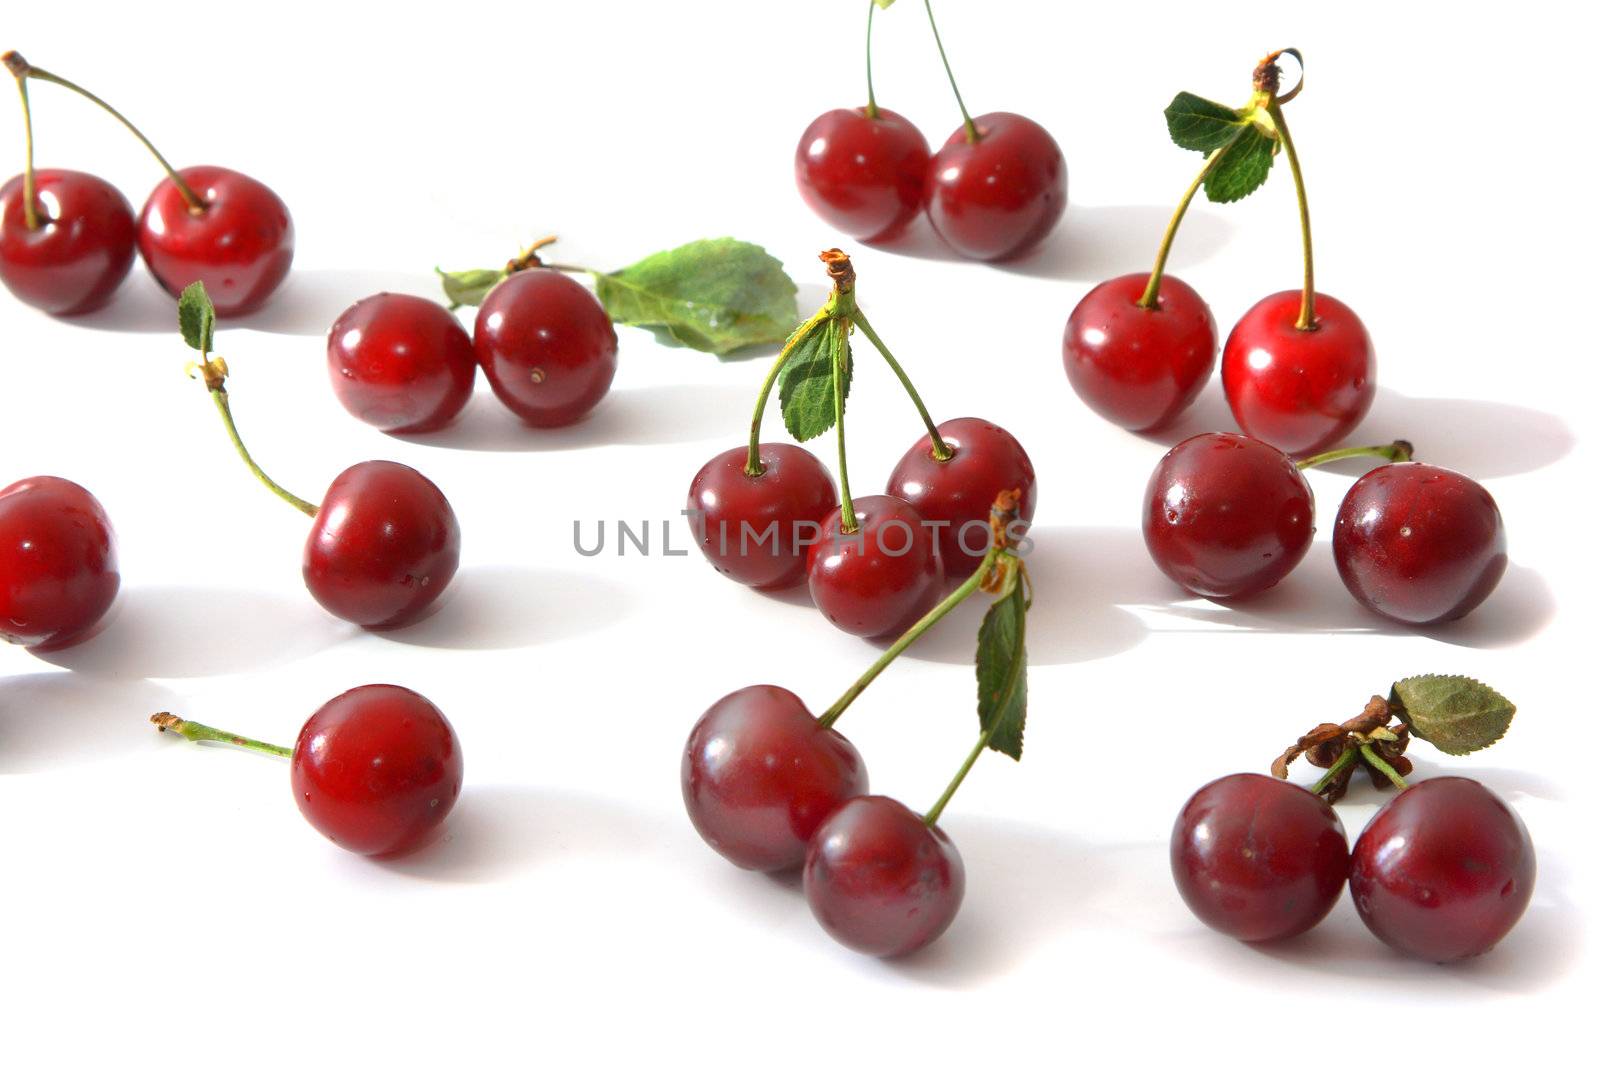 Ripe berries of a cherry of red color and their shadow on light background.